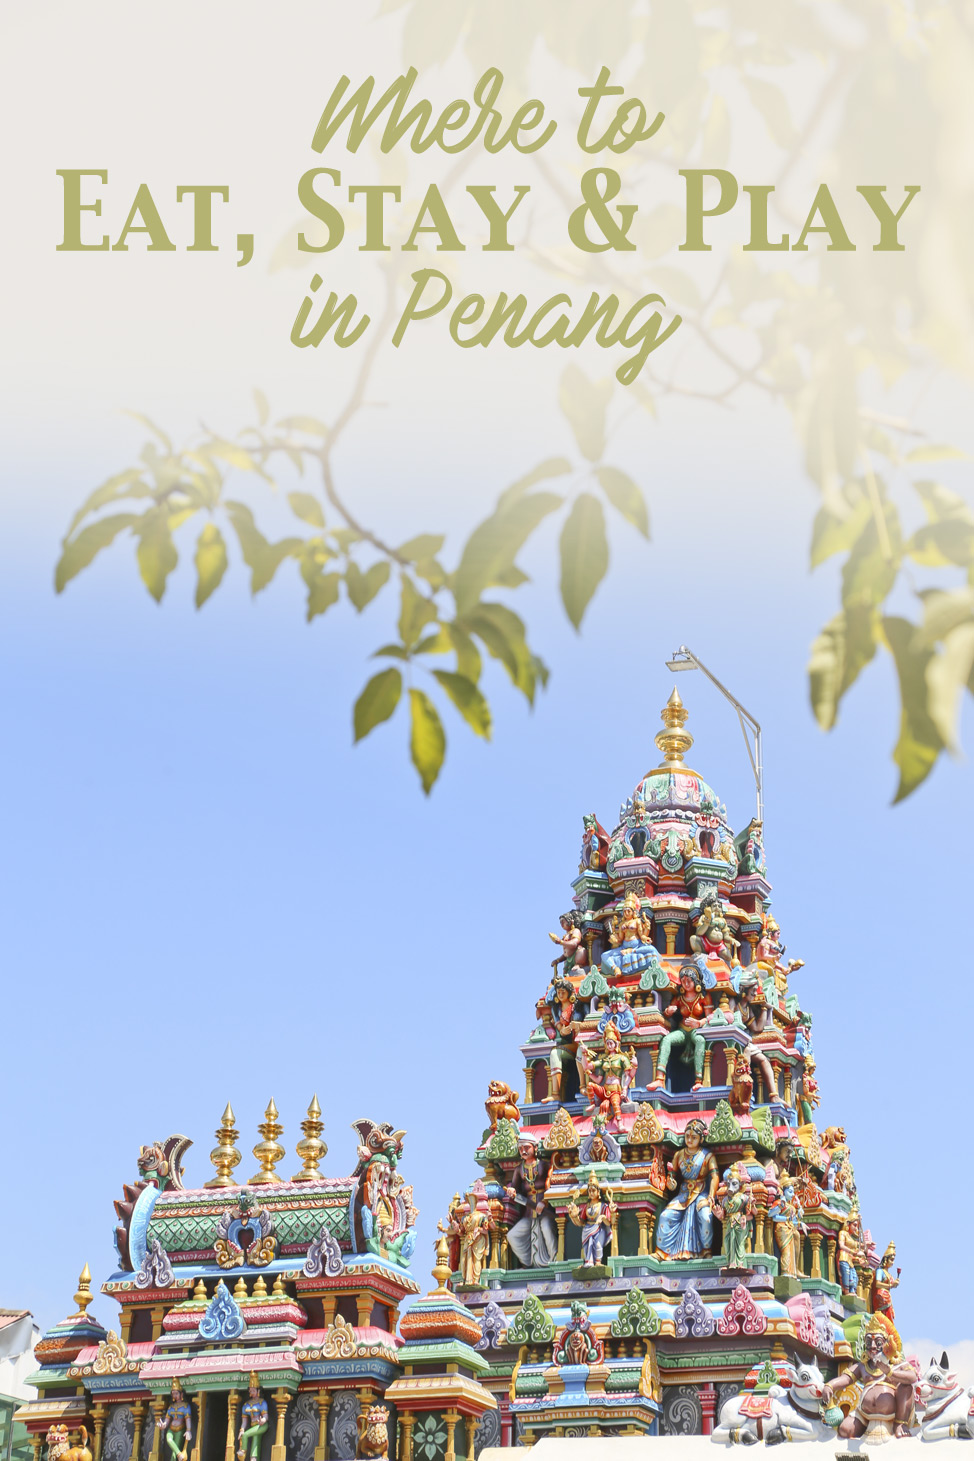 Where to Eat Stay and Play in Penang